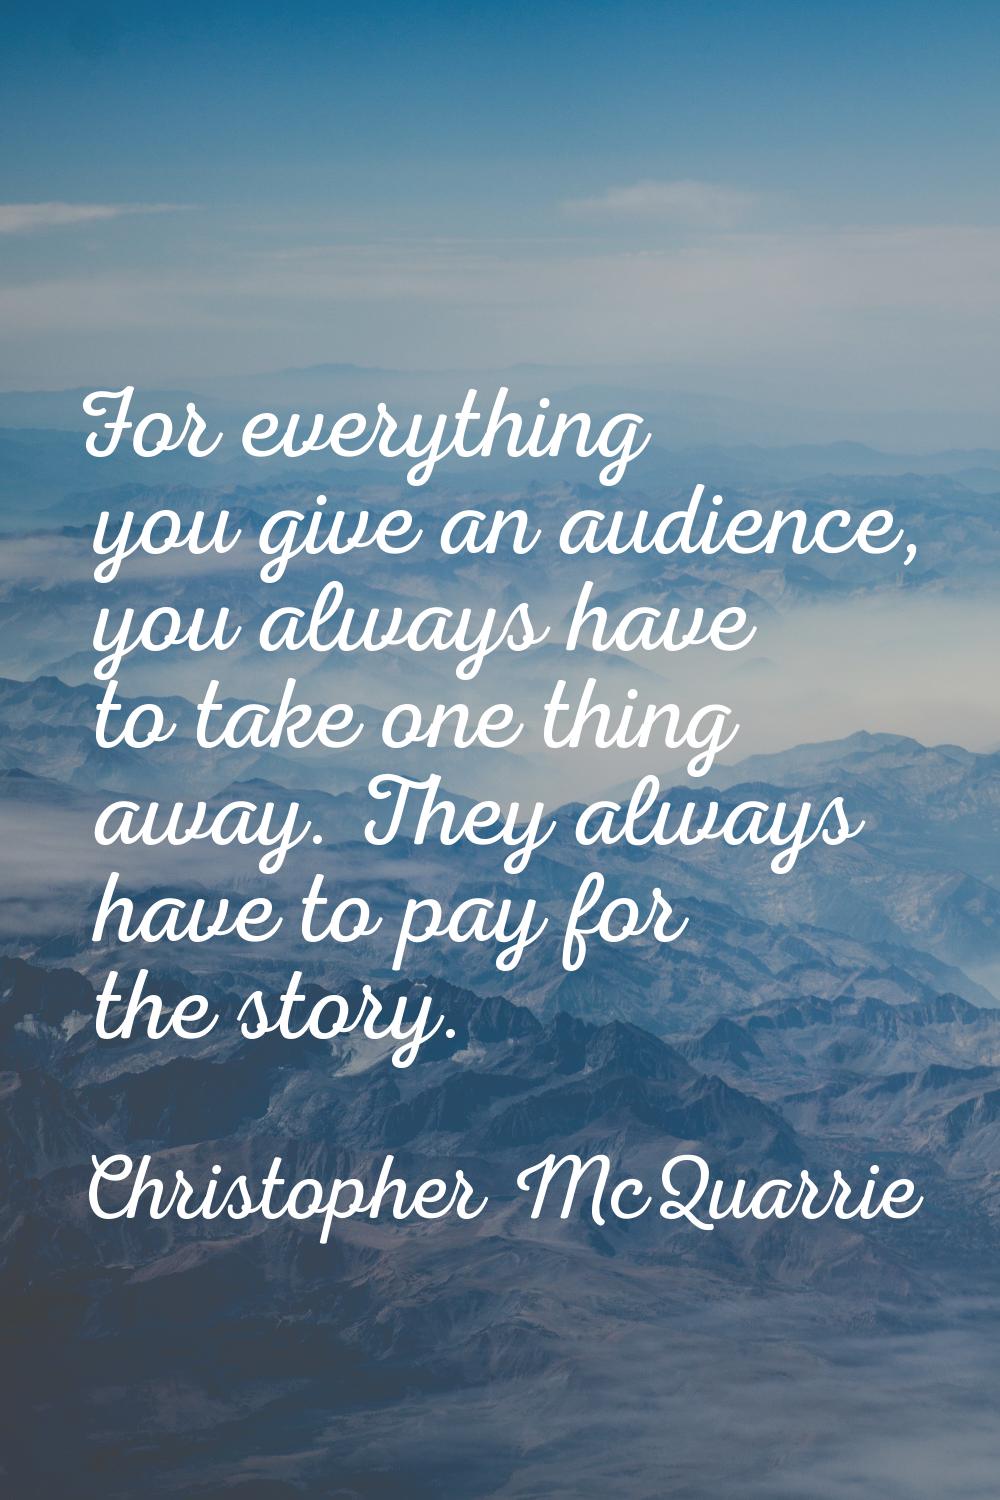 For everything you give an audience, you always have to take one thing away. They always have to pa